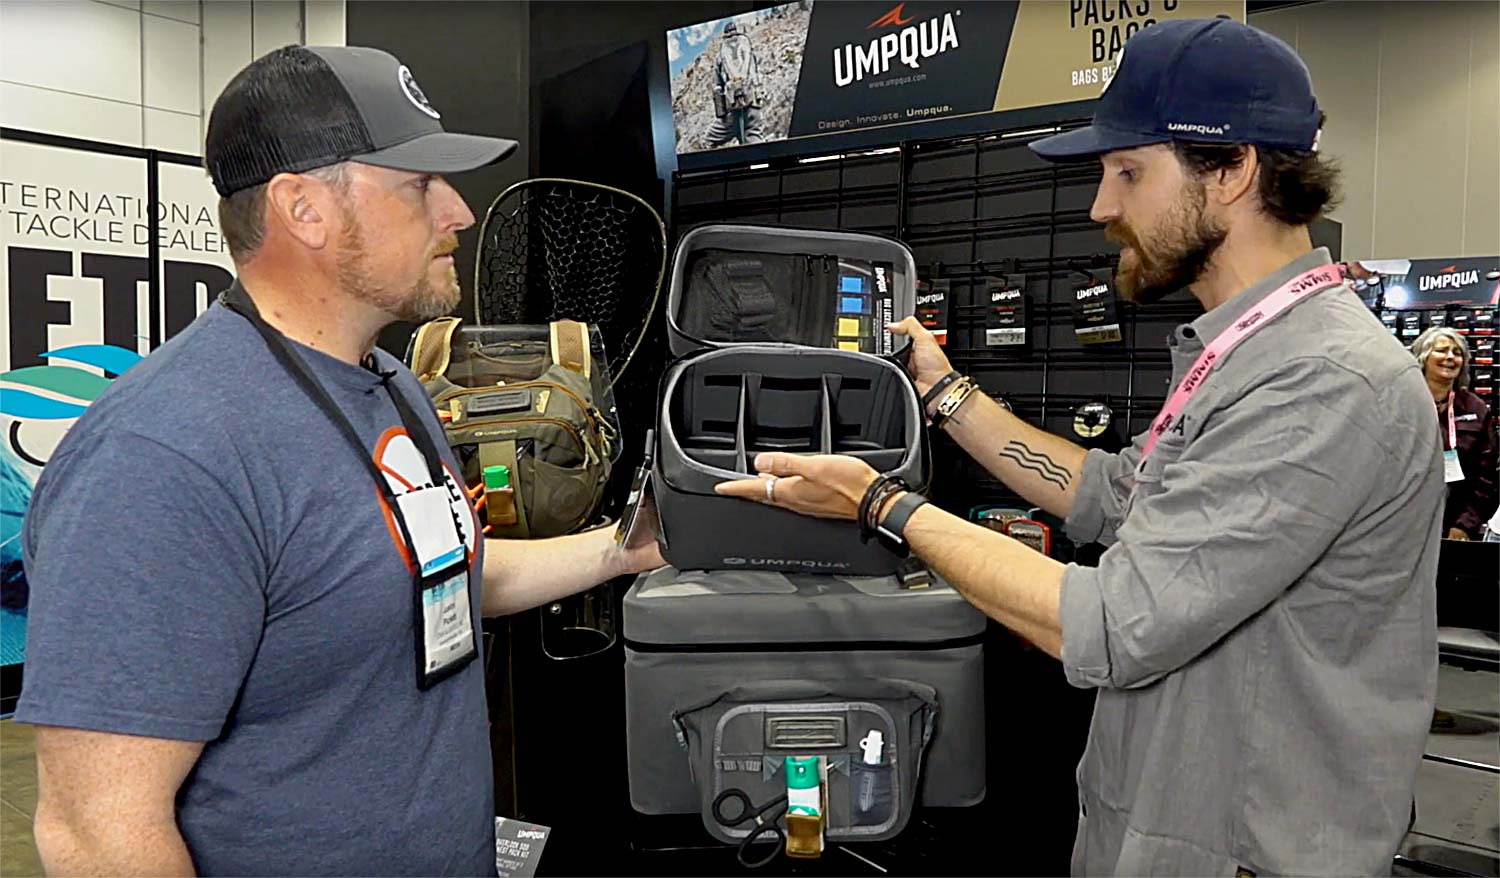 New Zero Sweep Packs and Boat Bags from Umpqua: Video - Fly